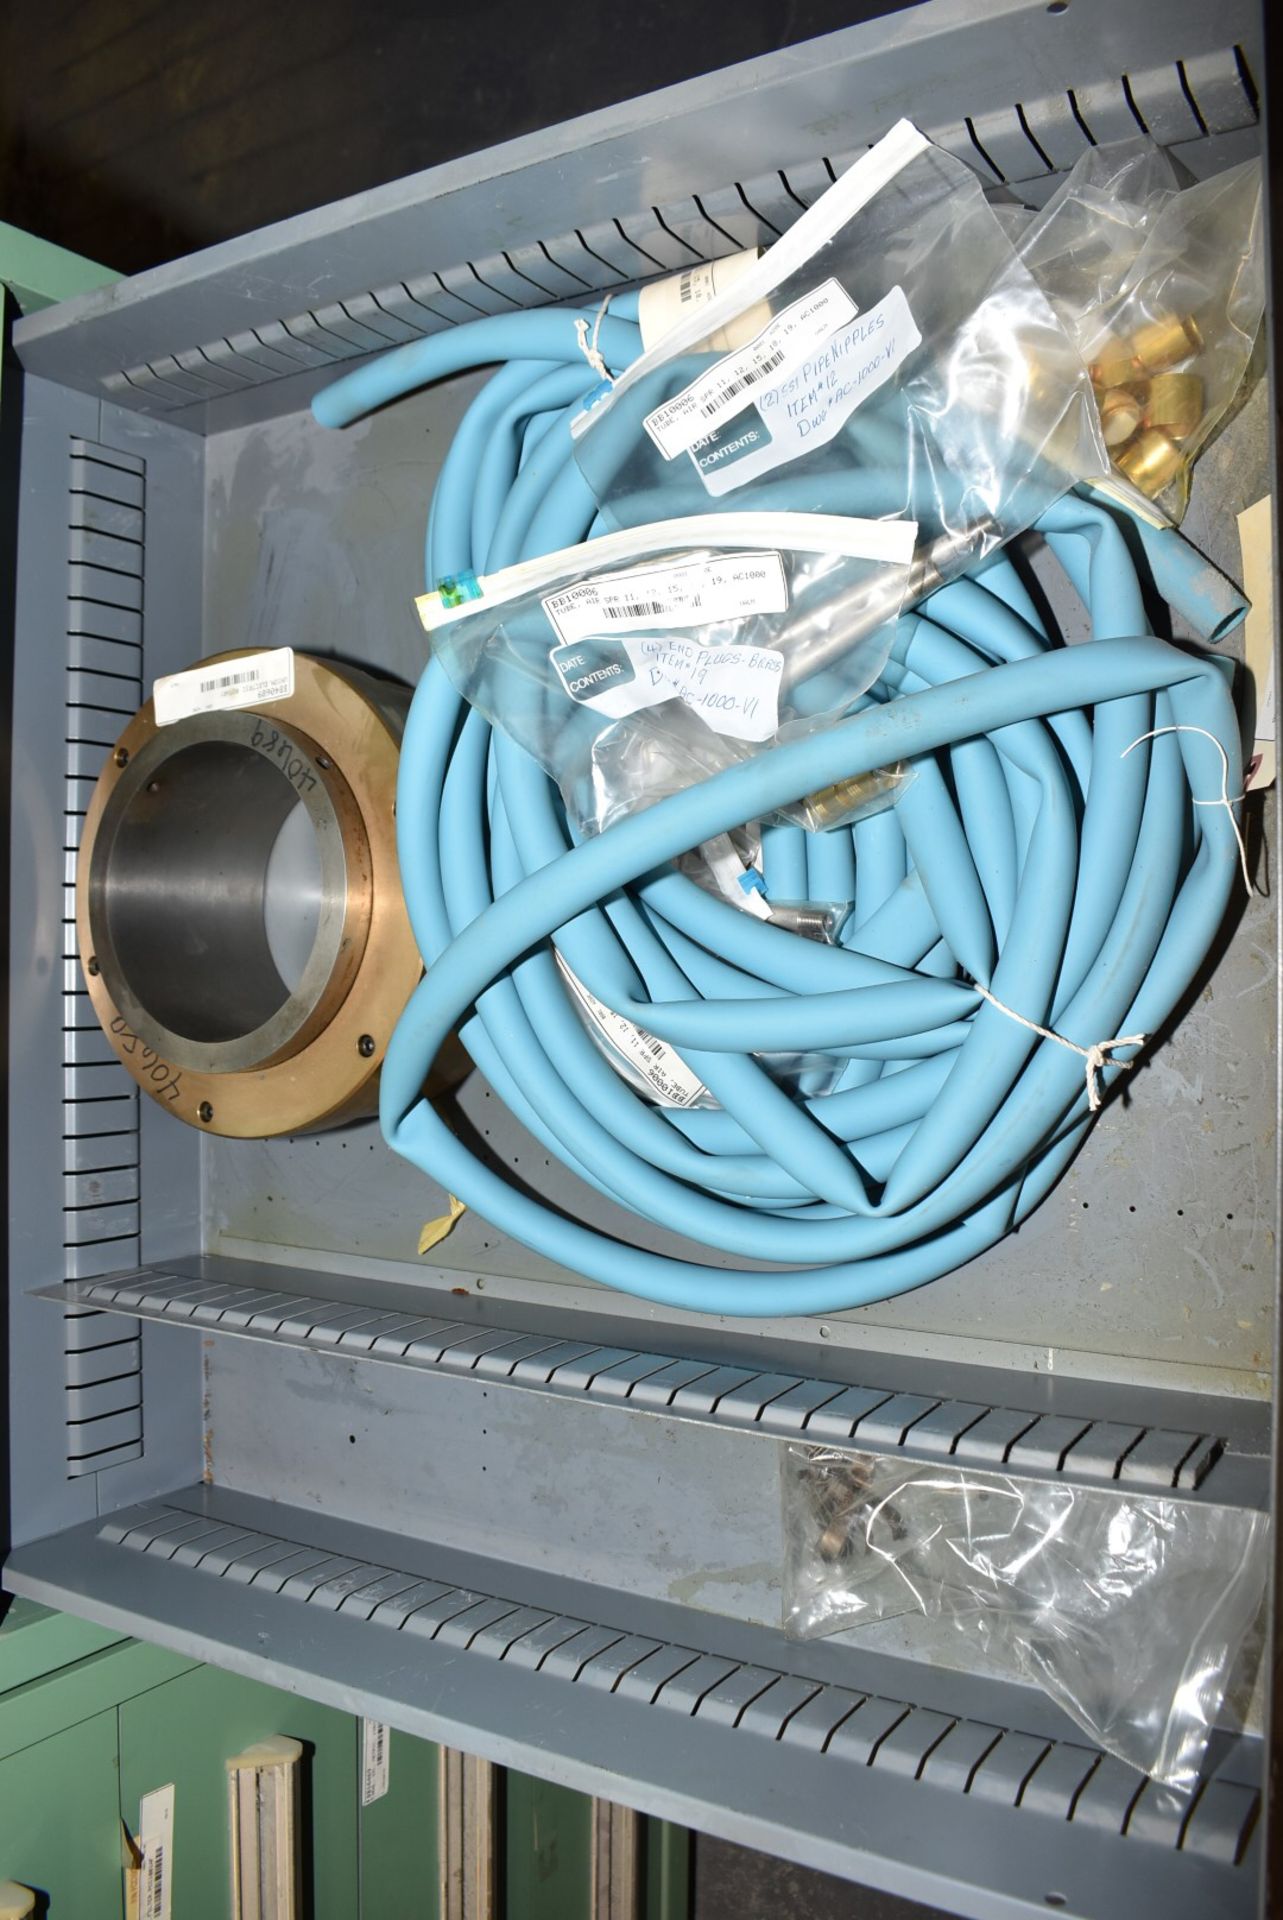 LOT/ REMAINING CONTENTS OF CABINET - INCLUDING BIRD SPARE PARTS, OIL SEALS, TUBING & FITTINGS, SHAFT - Image 4 of 5